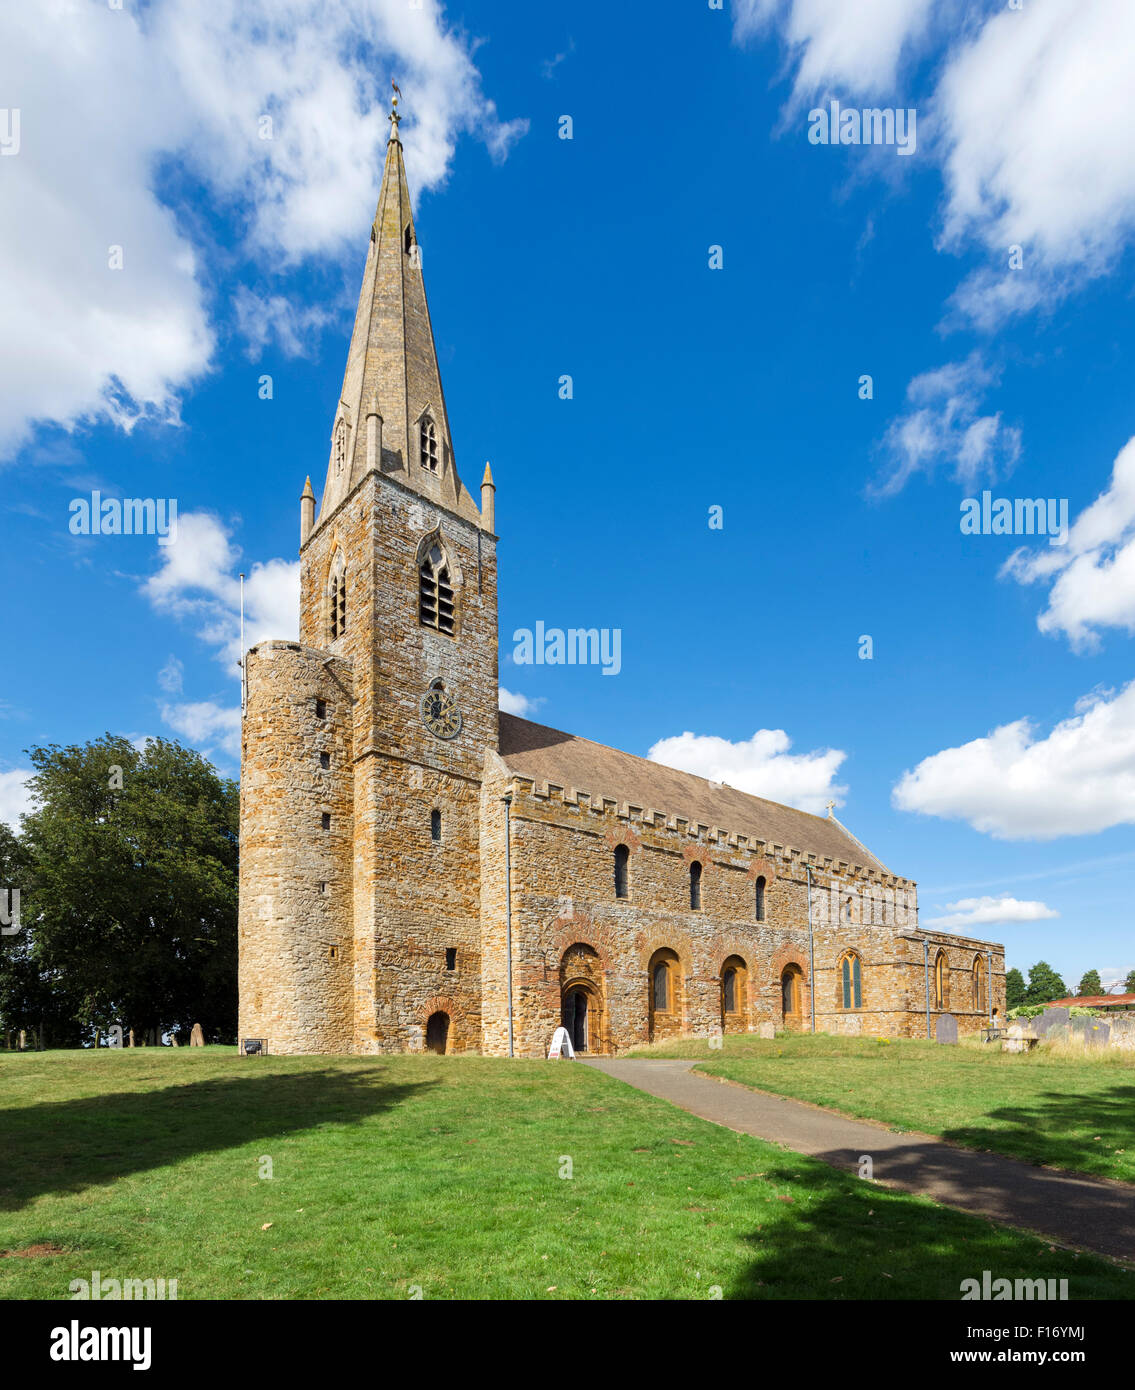 Brixworth Church. All Saints Church, one of the oldest Anglo-Saxon churches in the country, dating from around 690 AD, Brixworth, Northants, UK Stock Photo